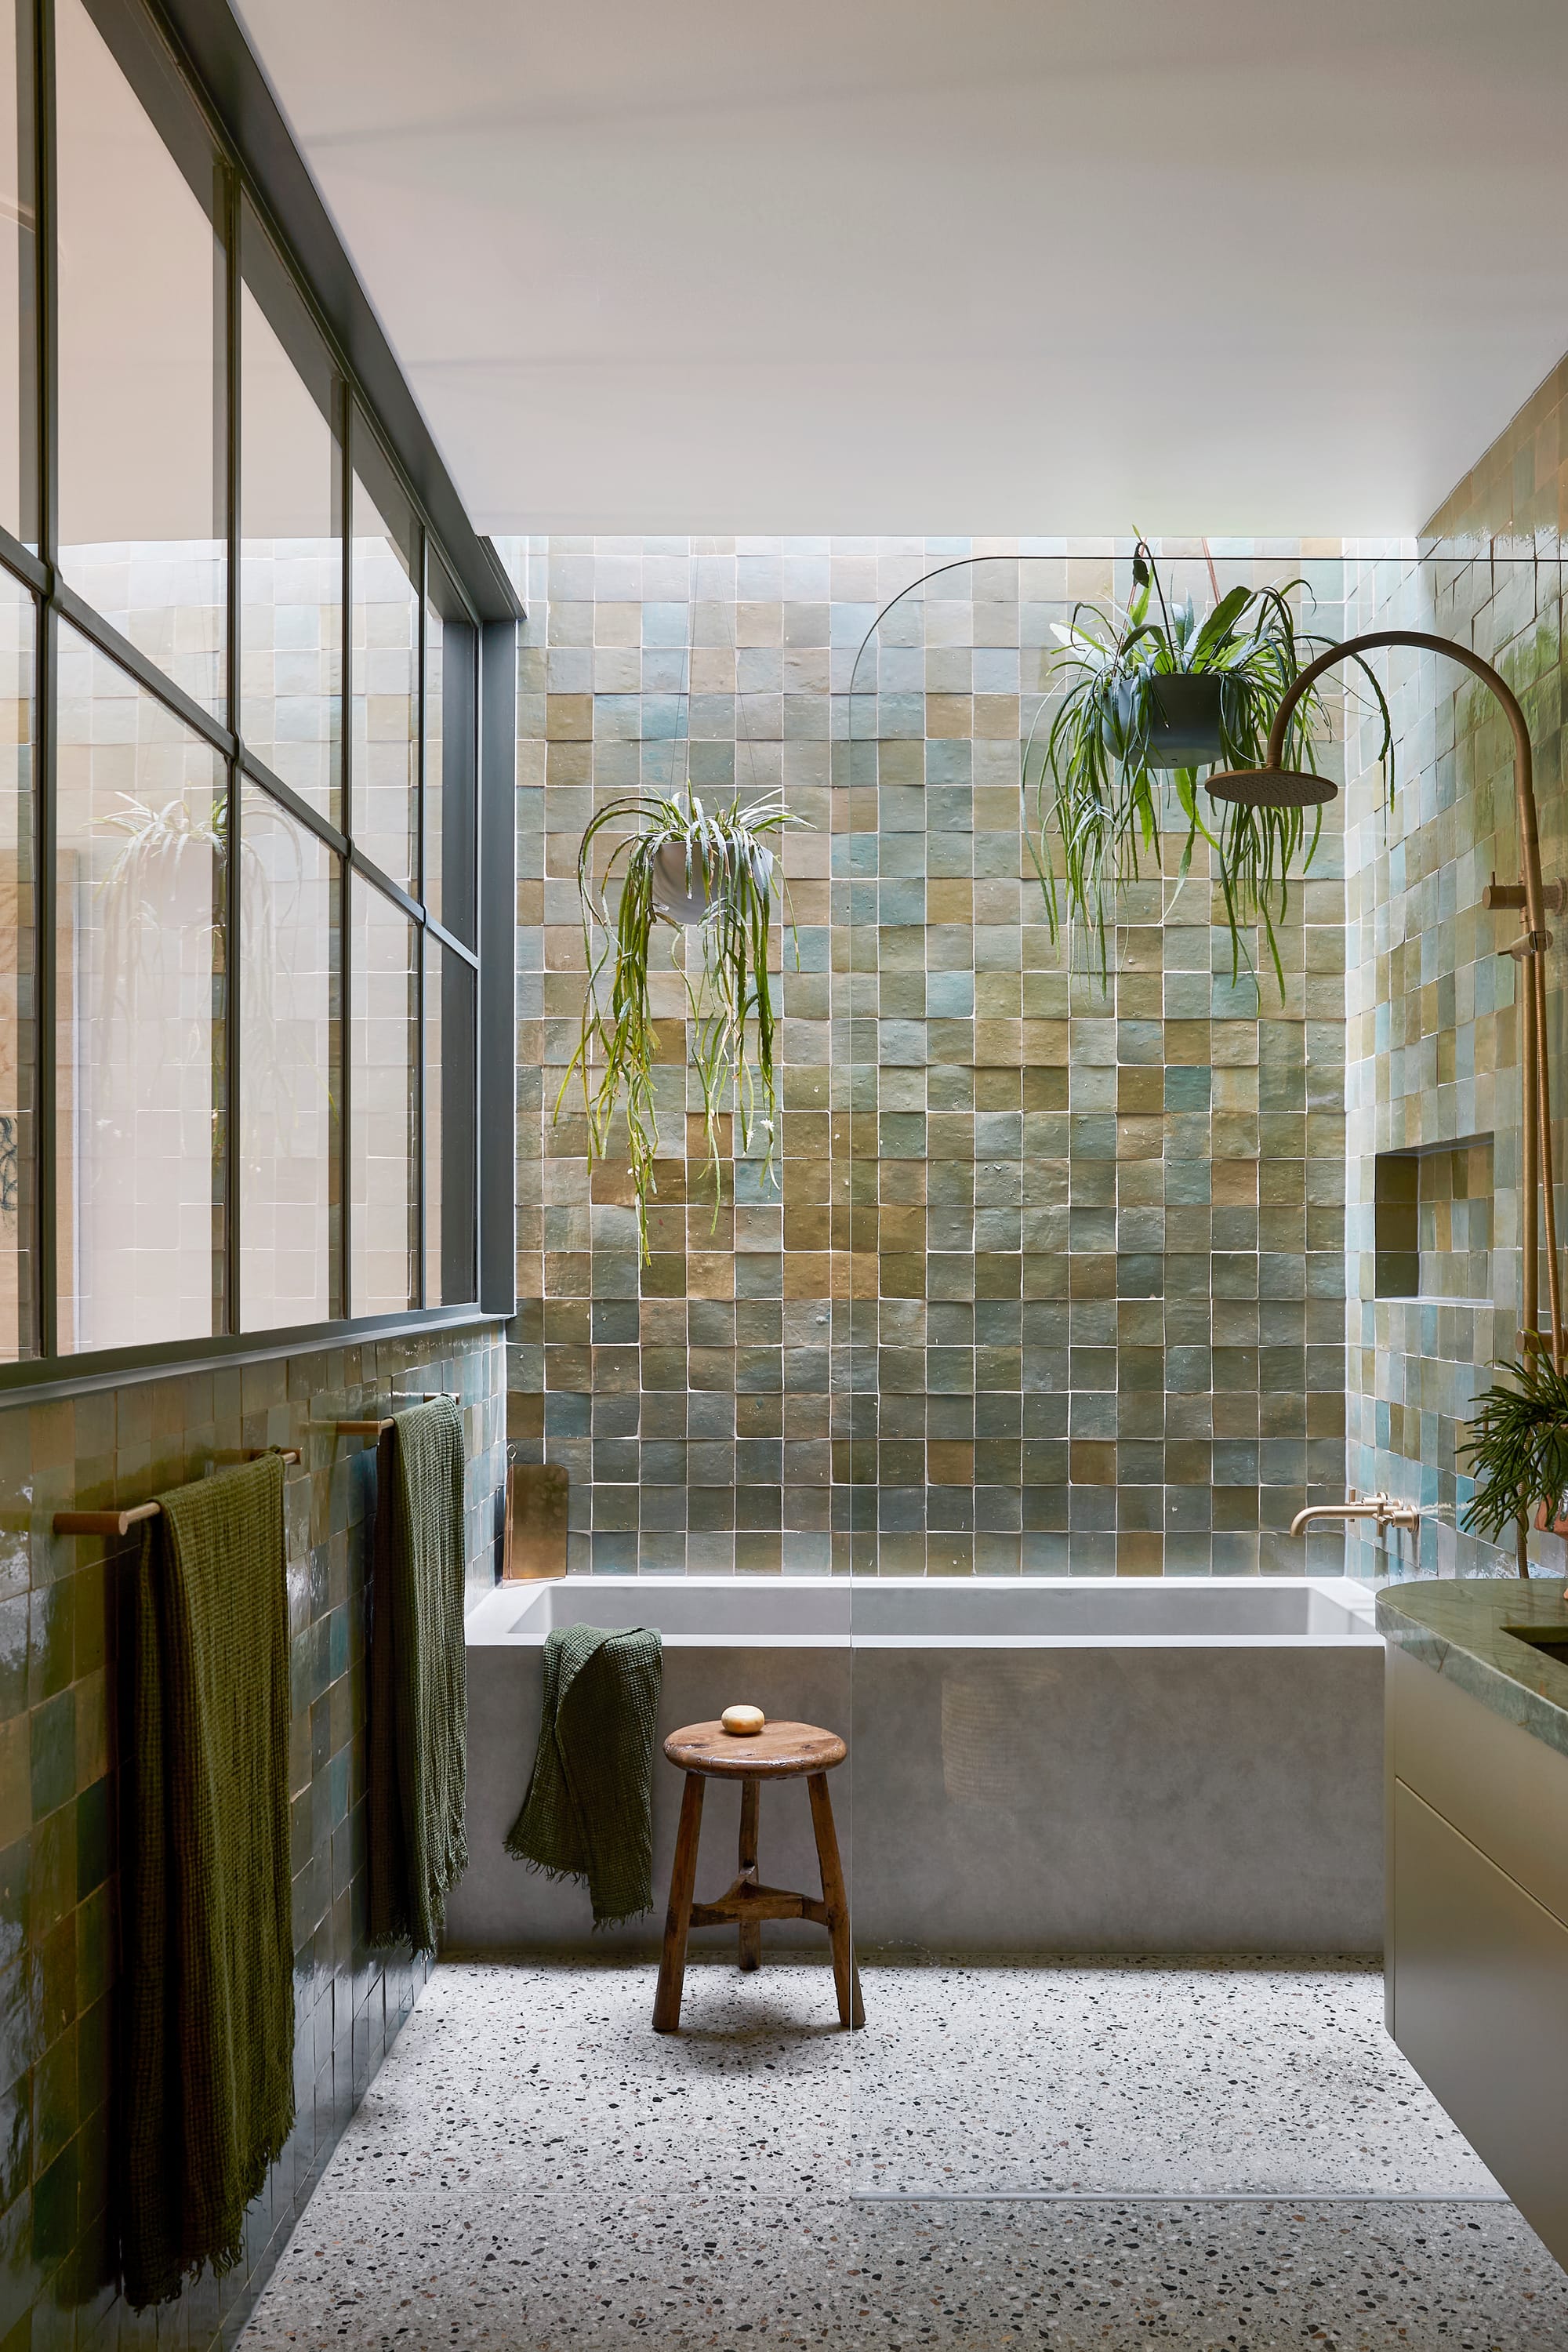 Fabrica by mcmahon and nerlich. Photography by Shannon McGrath. Ensuite with green wall tiles and concrete tub. Terrazzo floor times, hanging plants in shower. 